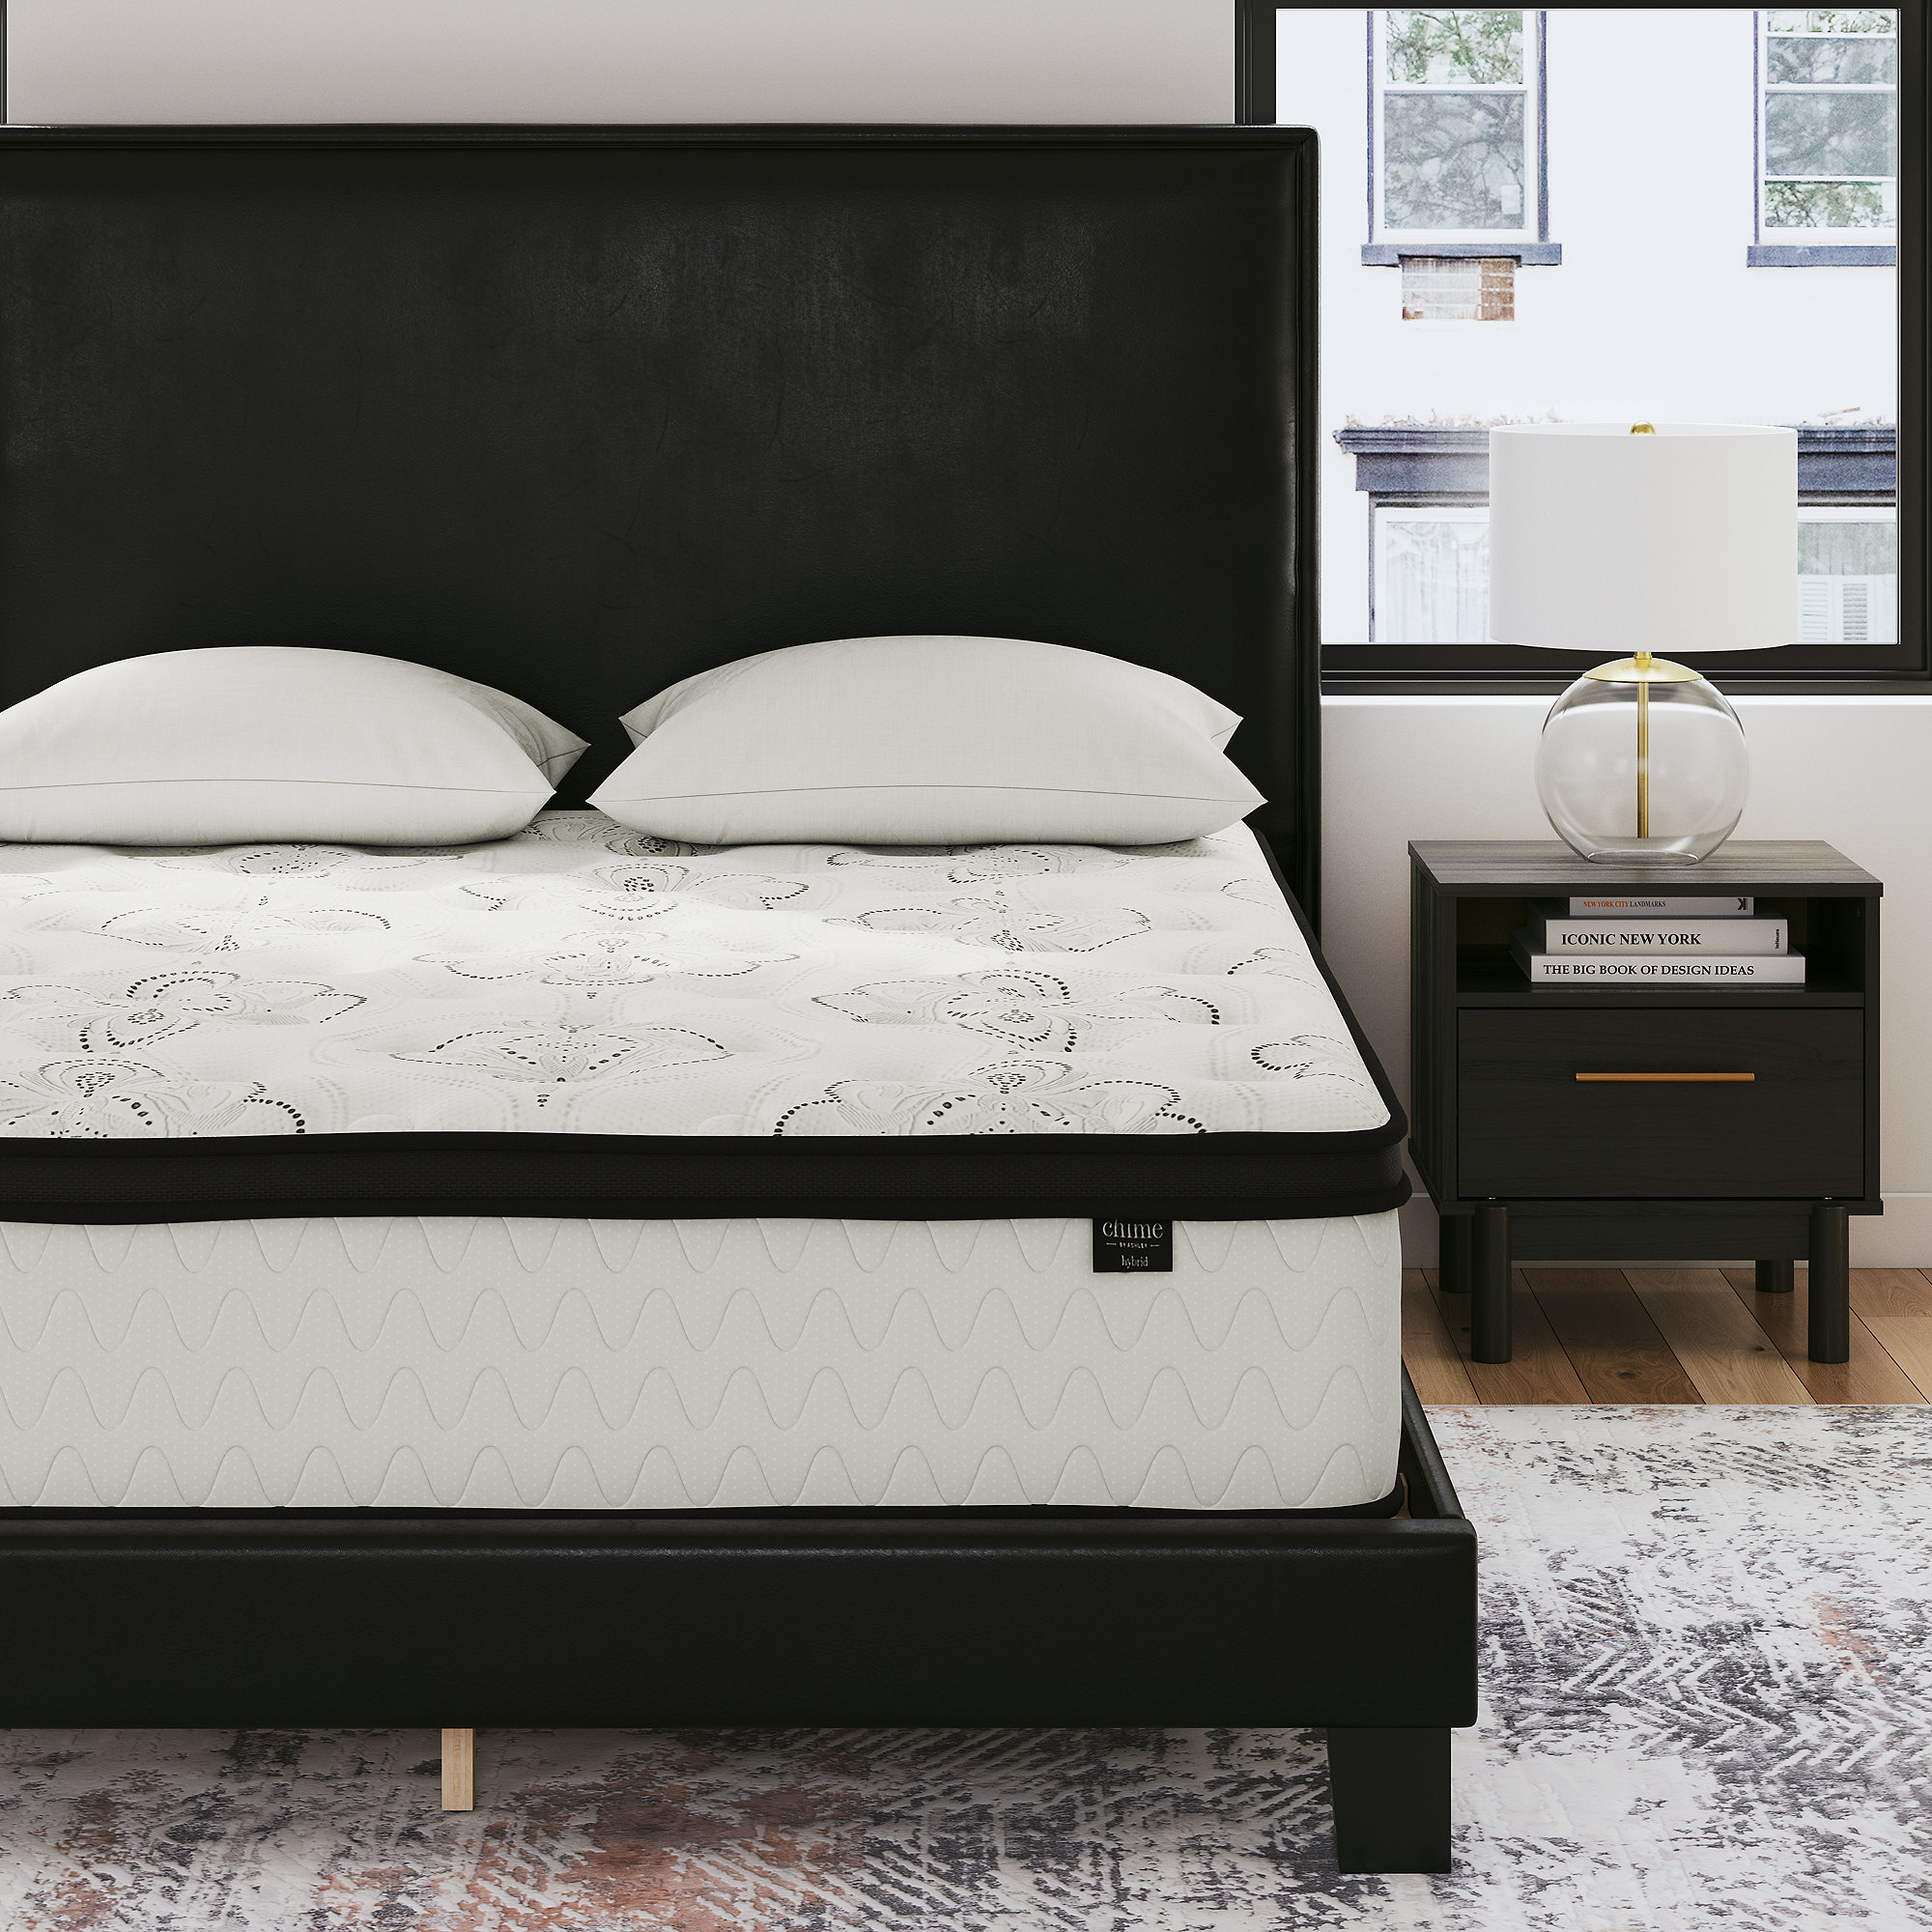 Signature Design by Ashley  Chime 12 Inch Hybrid King Mattress in a Box  White - image 1 of 9